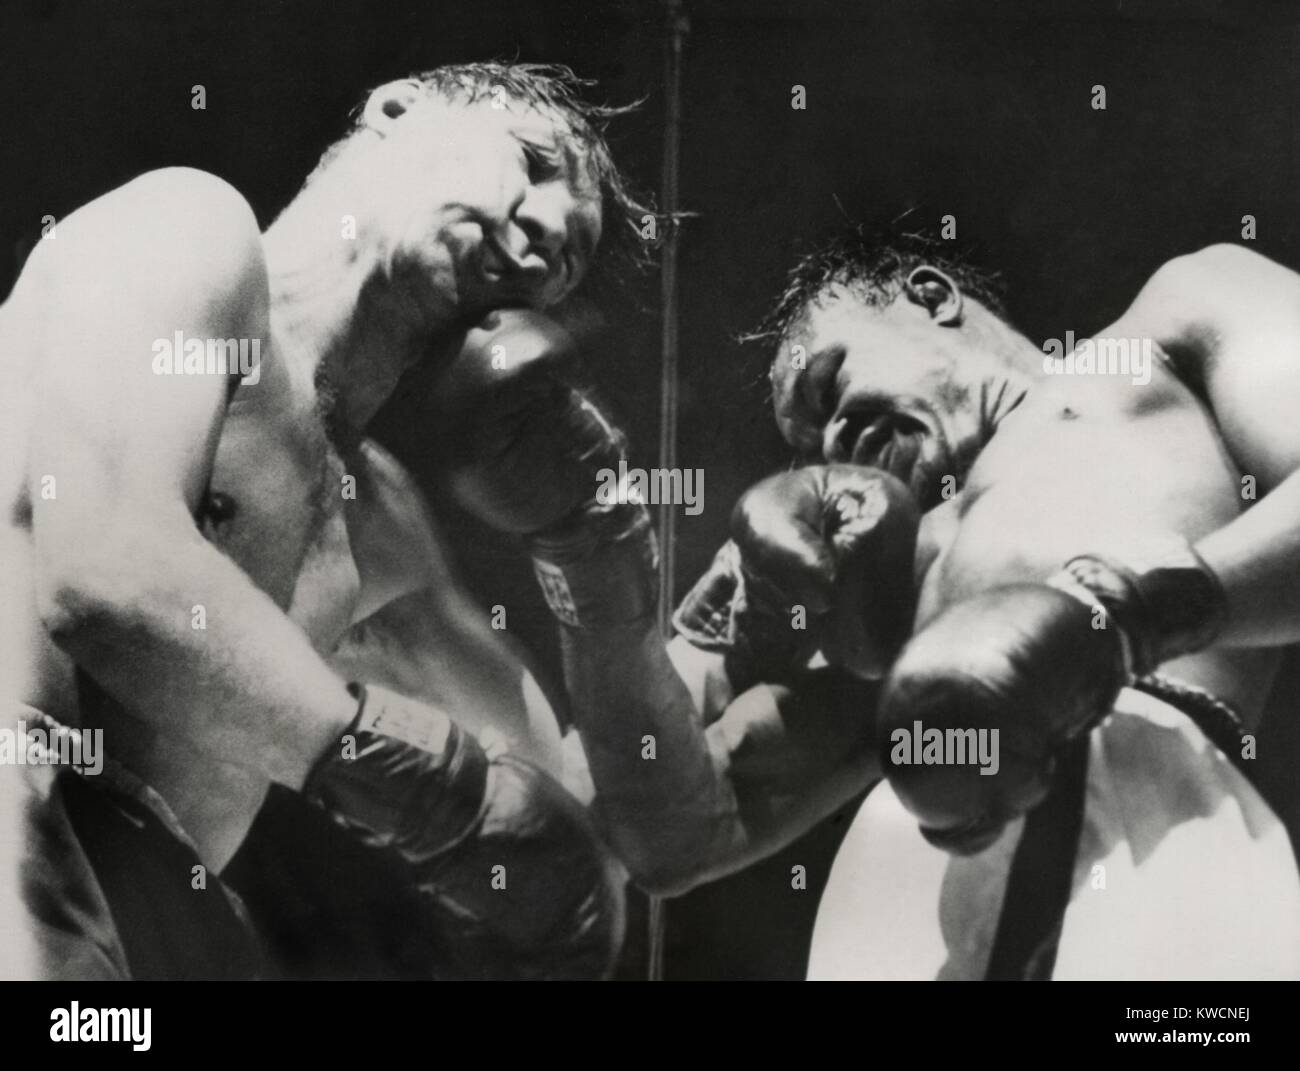 Kid Gavilan (right) vs. Billy Graham, in 6th round at Madison Square Garden. Feb. 13, 1950. The Welterweight boxers fought four times, with Gavilan winning three bouts. - (BSLOC 2014 17 155) Stock Photo